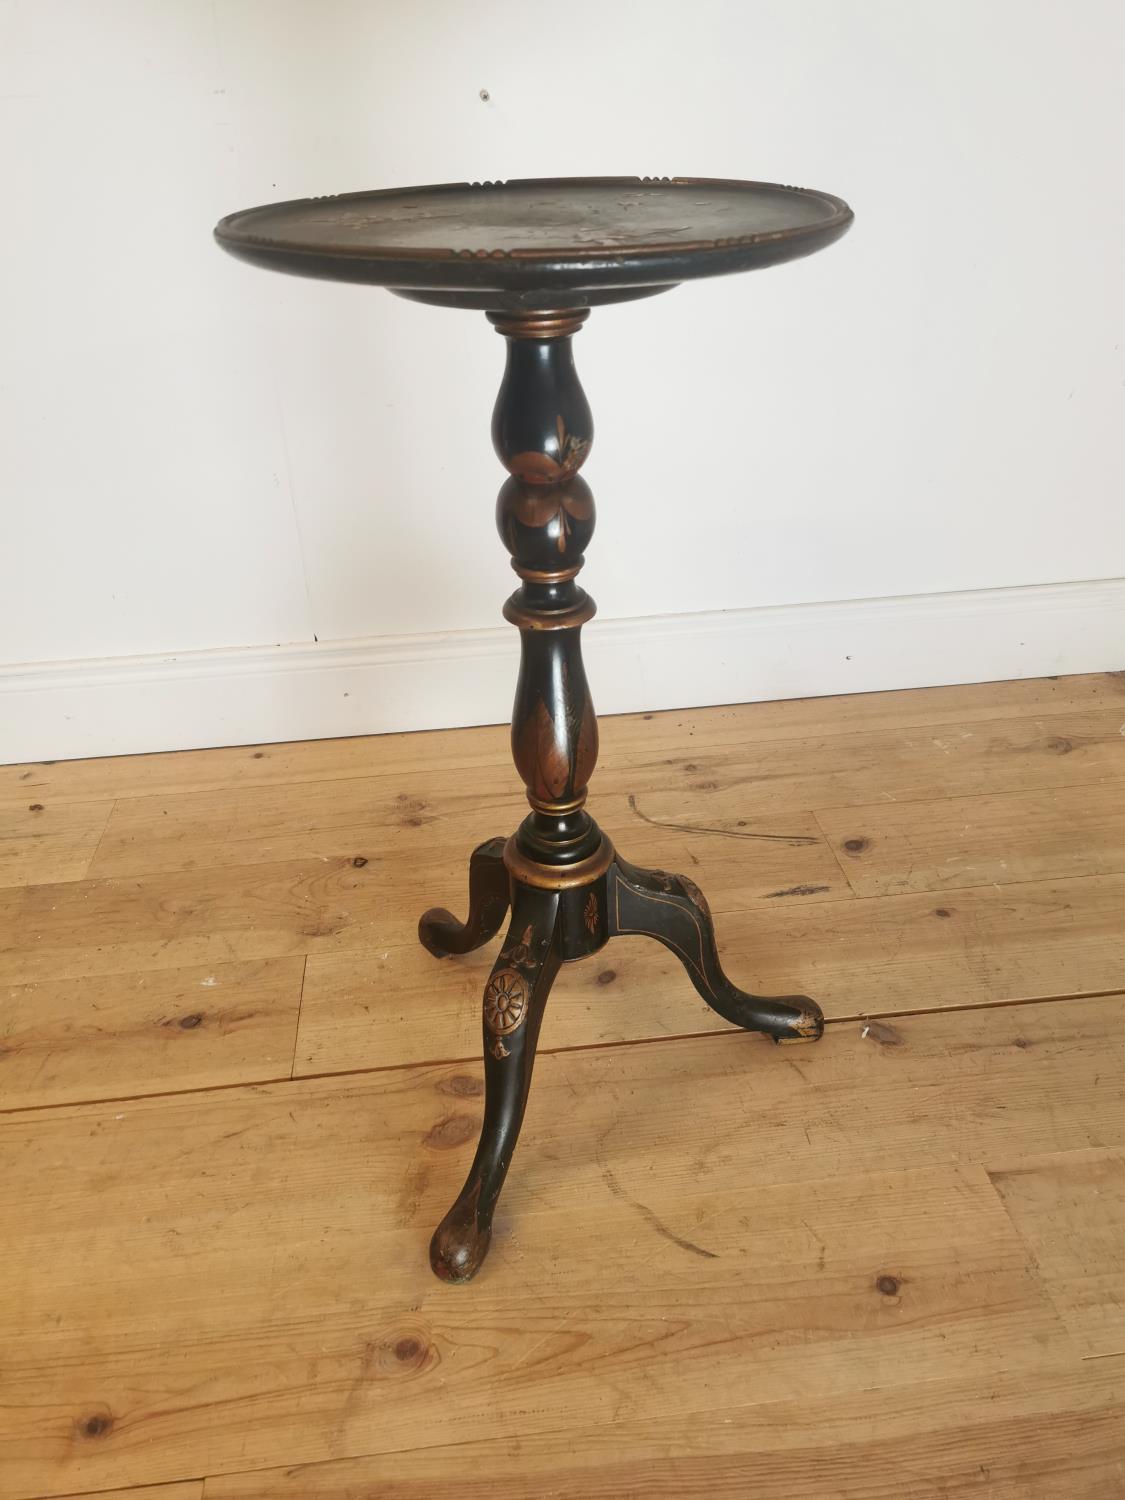 19th C. Japanese lacquered lamp table with turned column